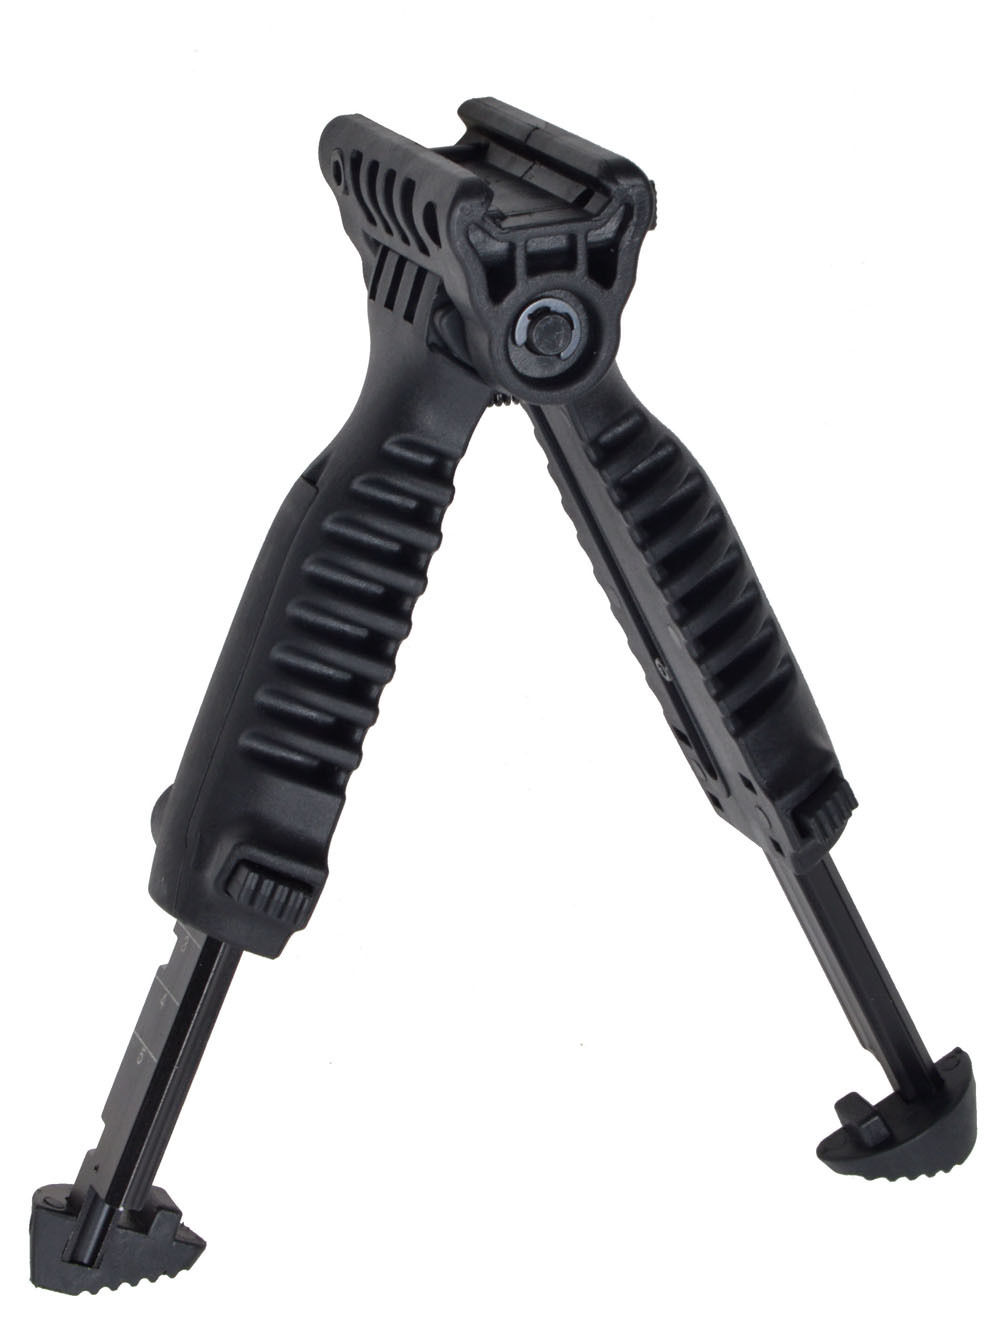 Product Name.Fore Hand Grip Bipod. 